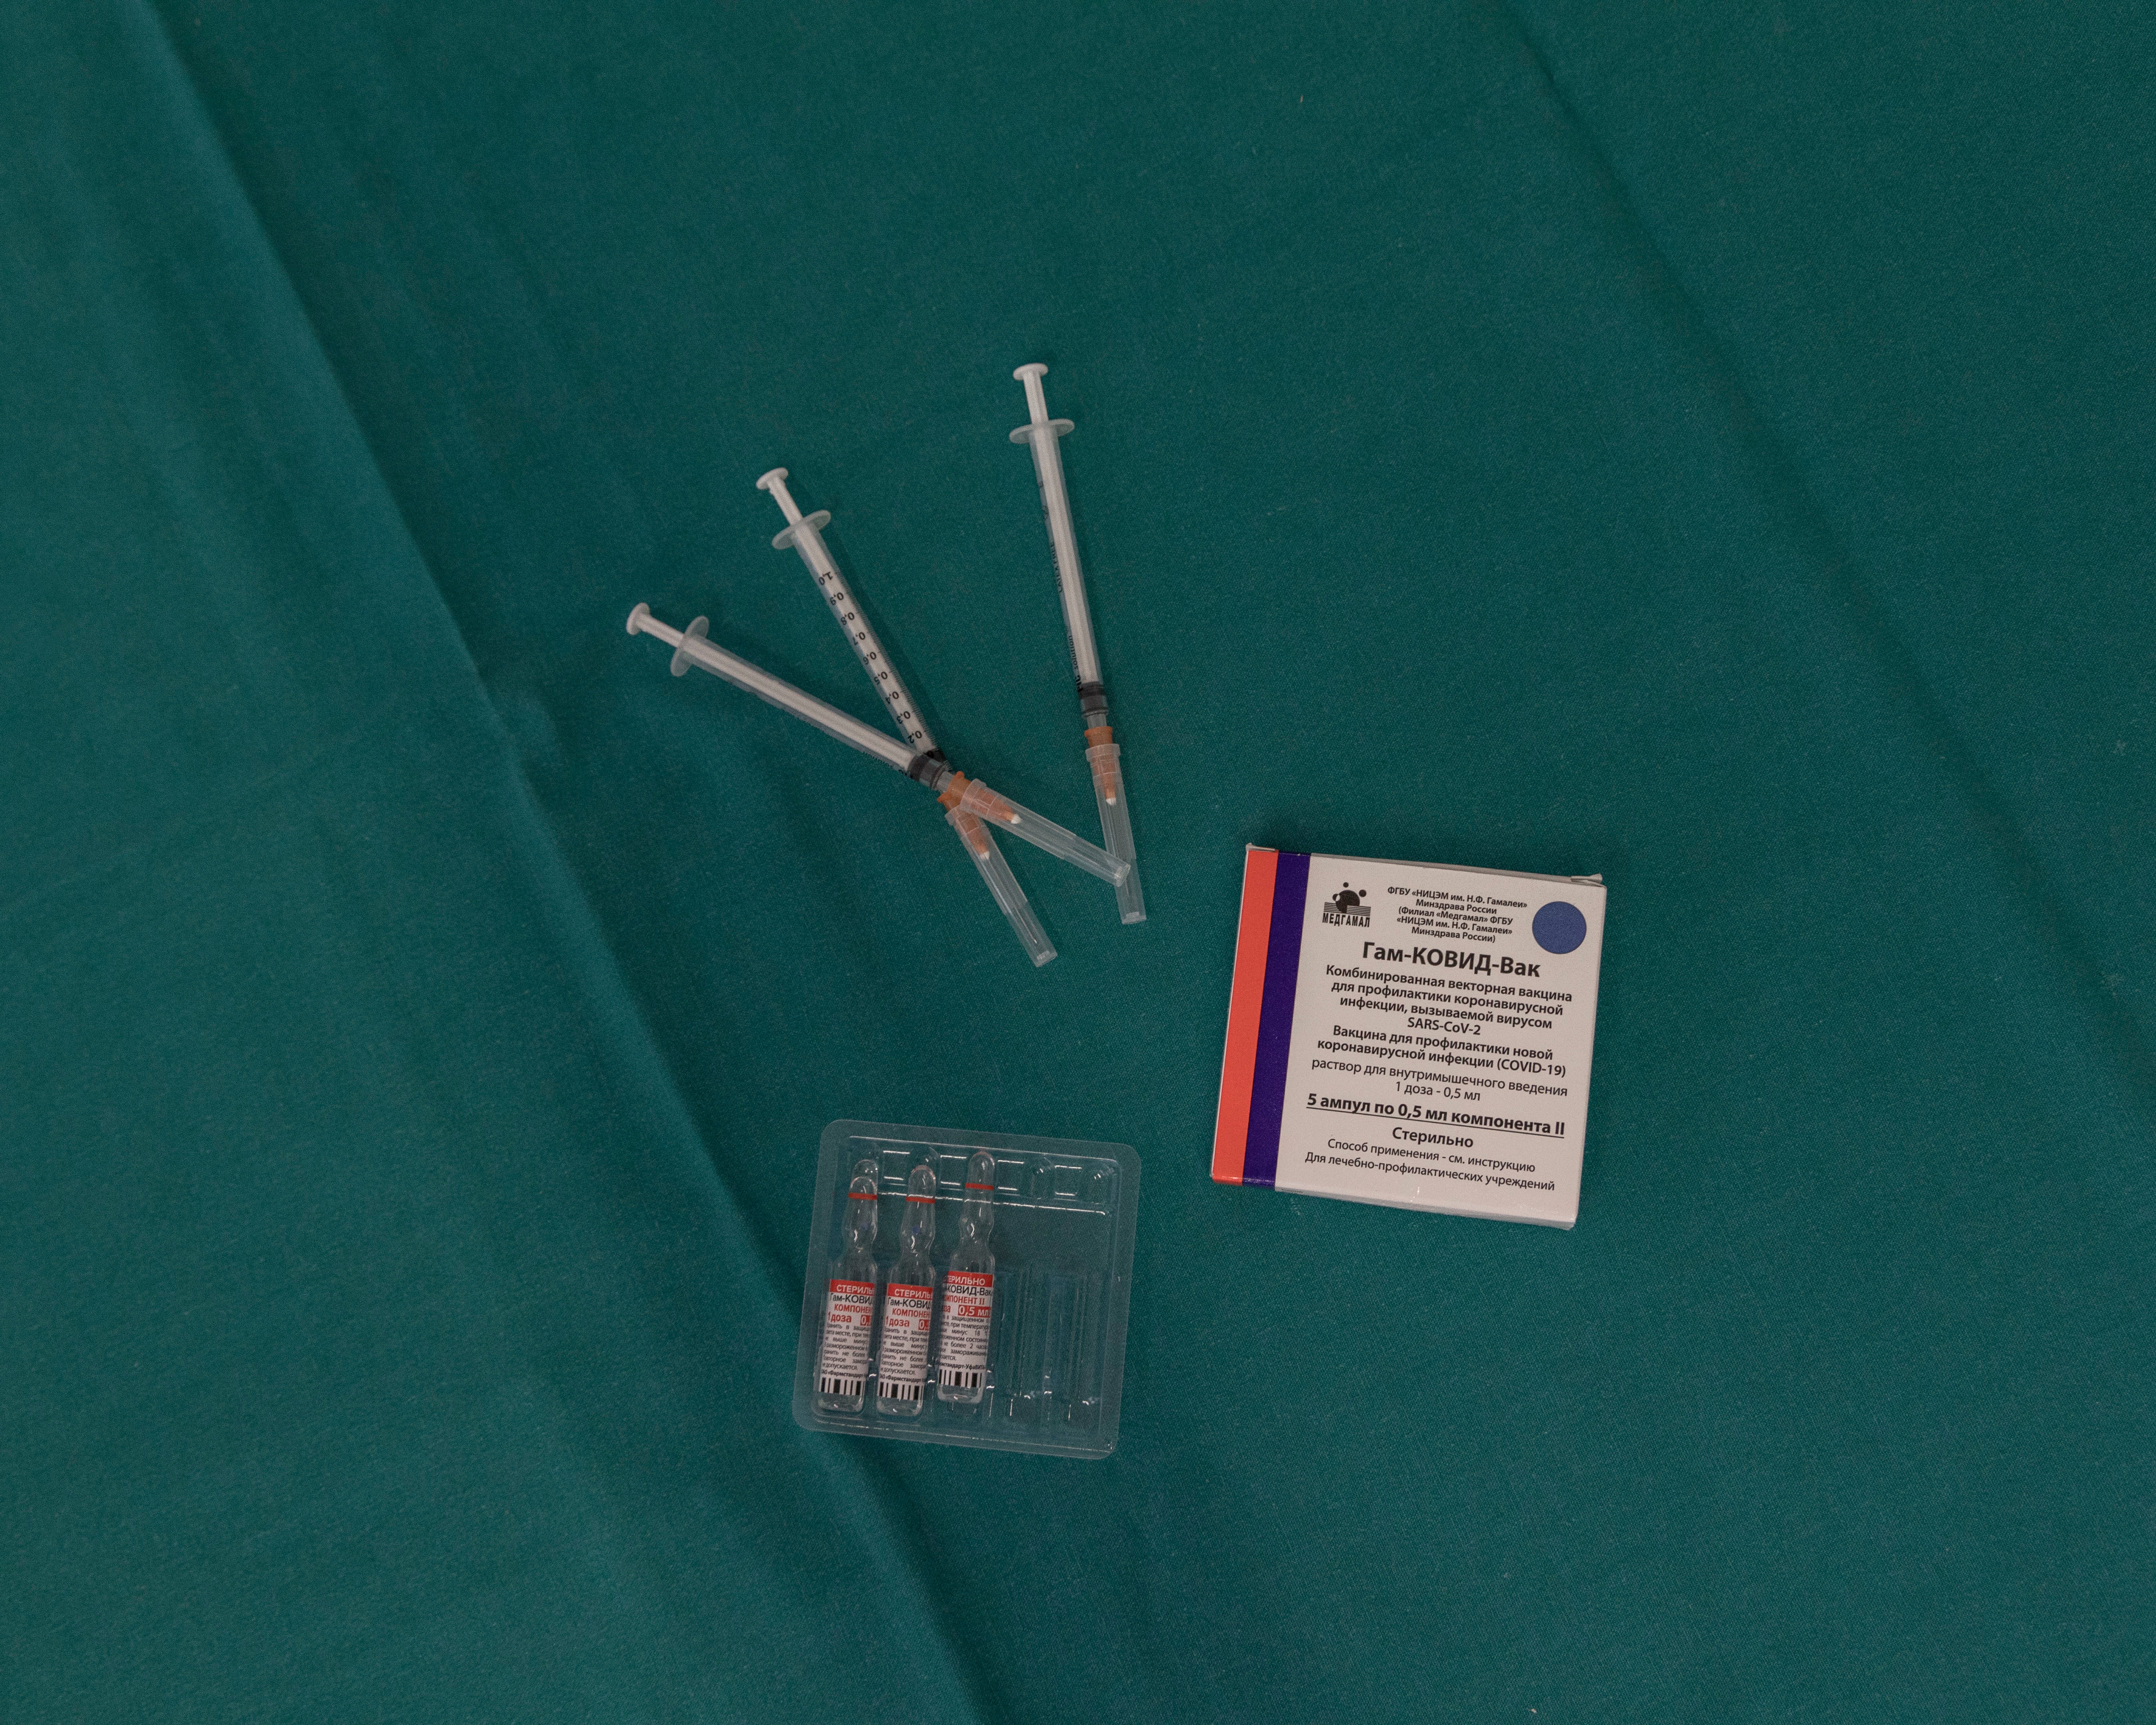 Sputnik V vaccine supplies are unpacked on the ground floor of the hospital